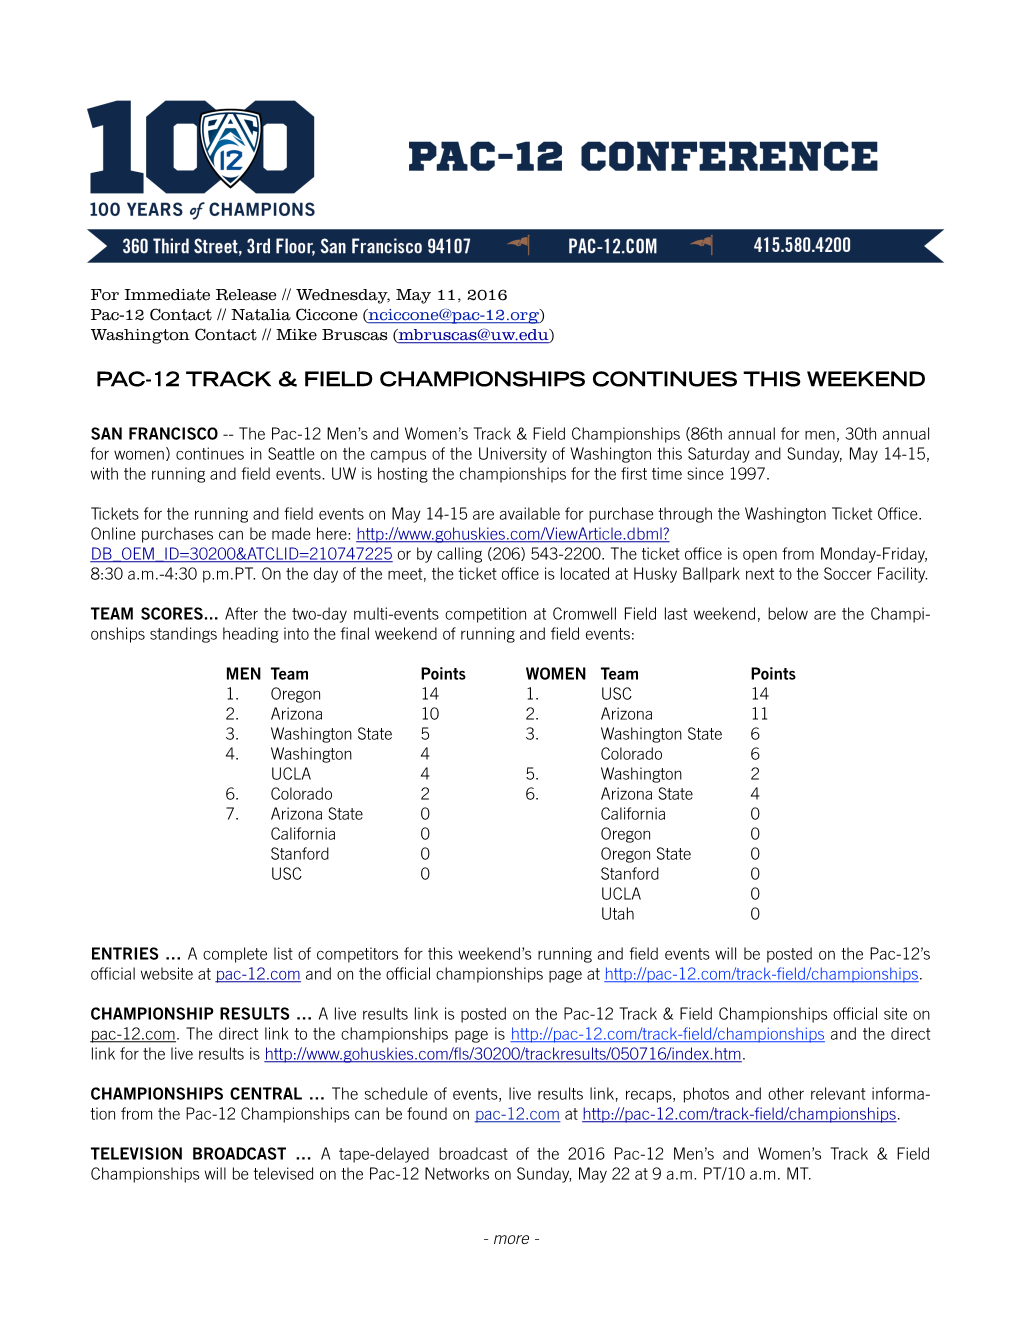 Pac-12 Track & Field Championships Continues This Weekend